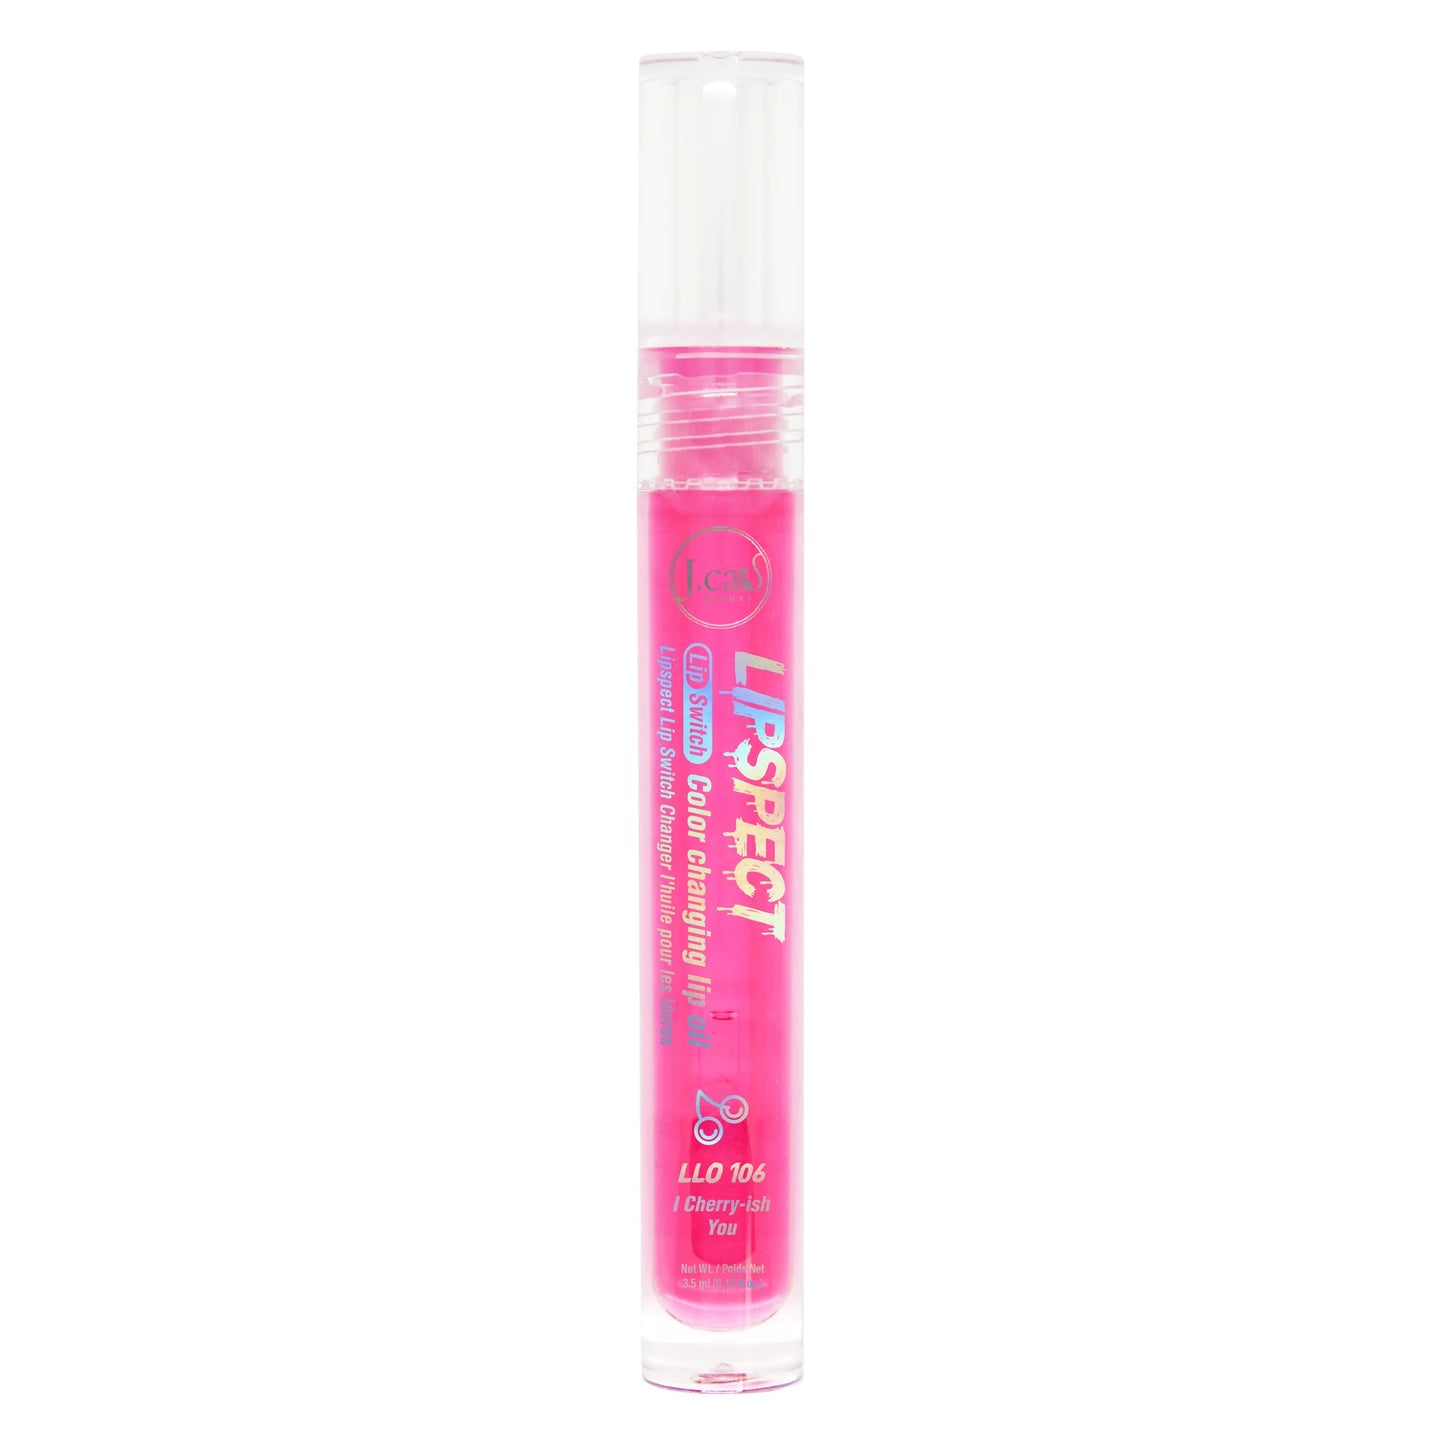 JCAT BEAUTY - LIPSPECT LIP SWITCH COLOR CHANGING LIP OIL